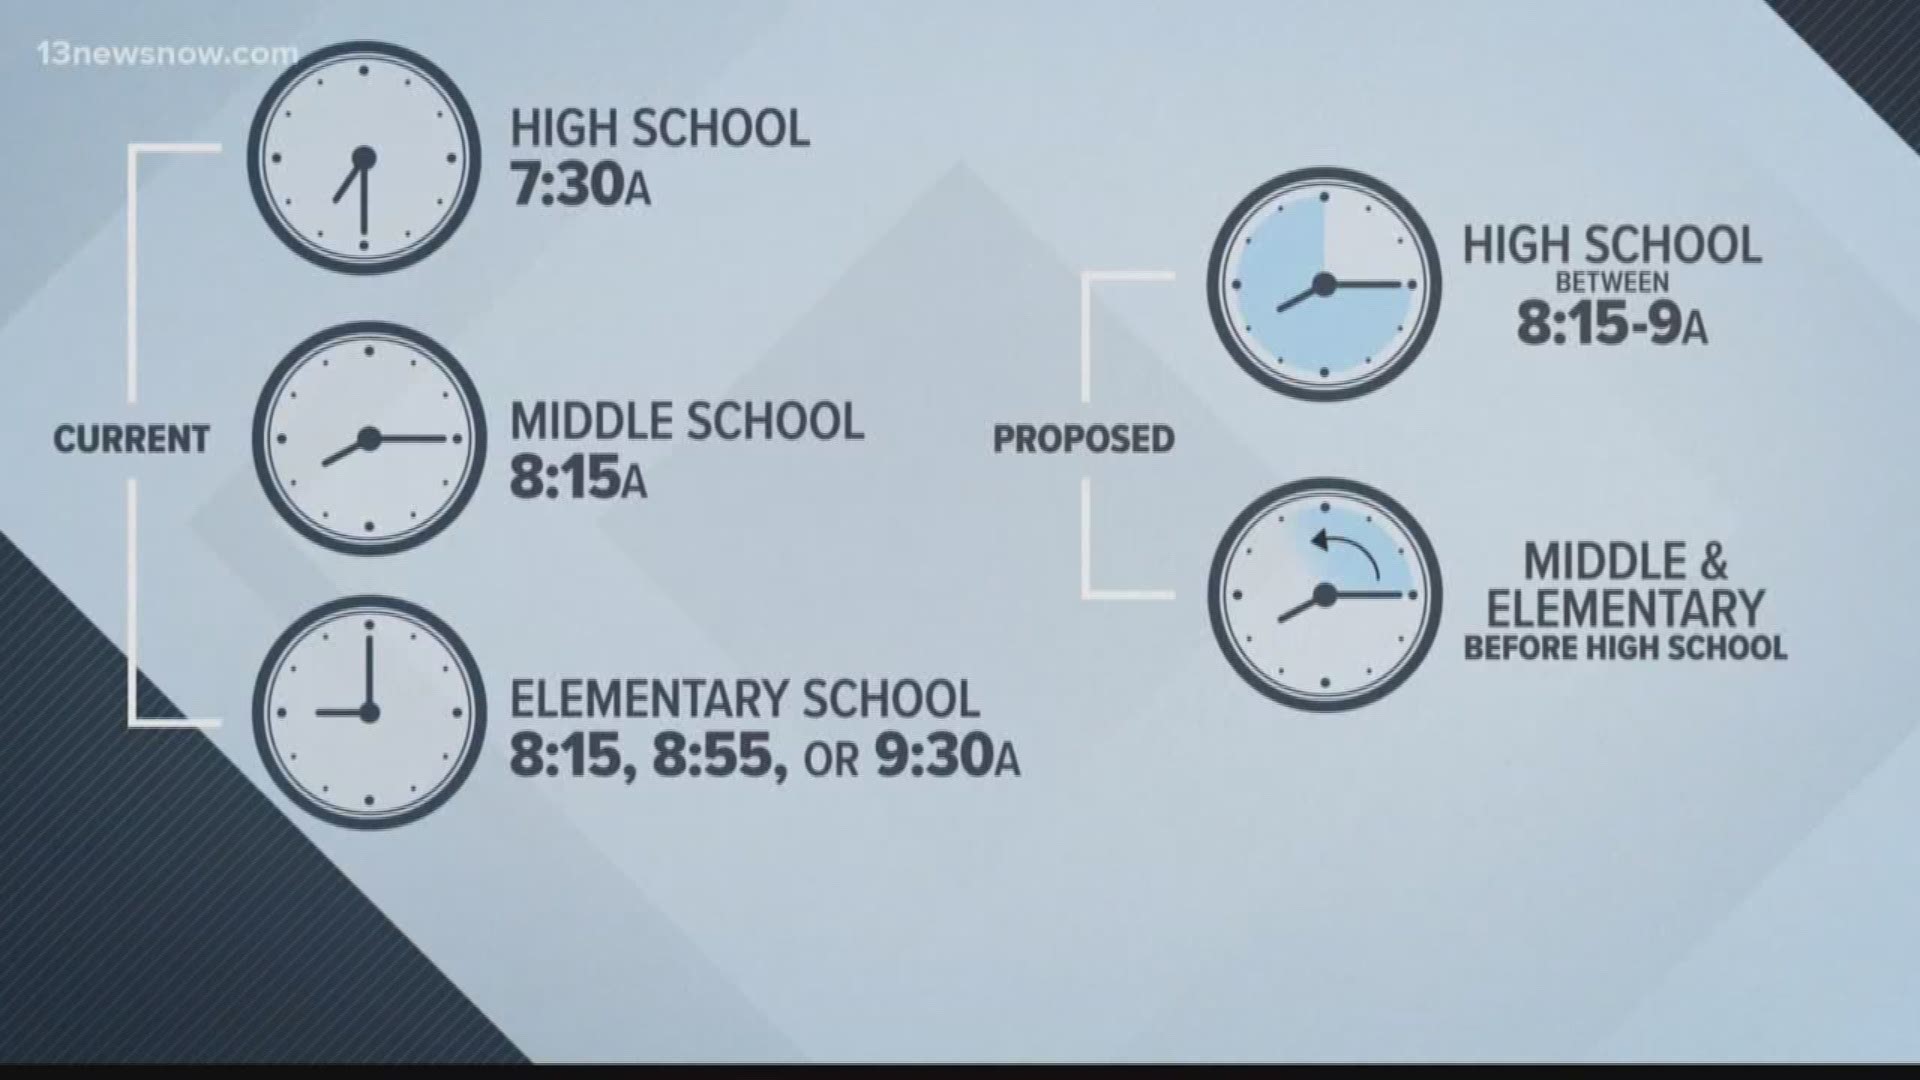 Norfolk Public Schools is considering a change in start time and consolidating three schools.